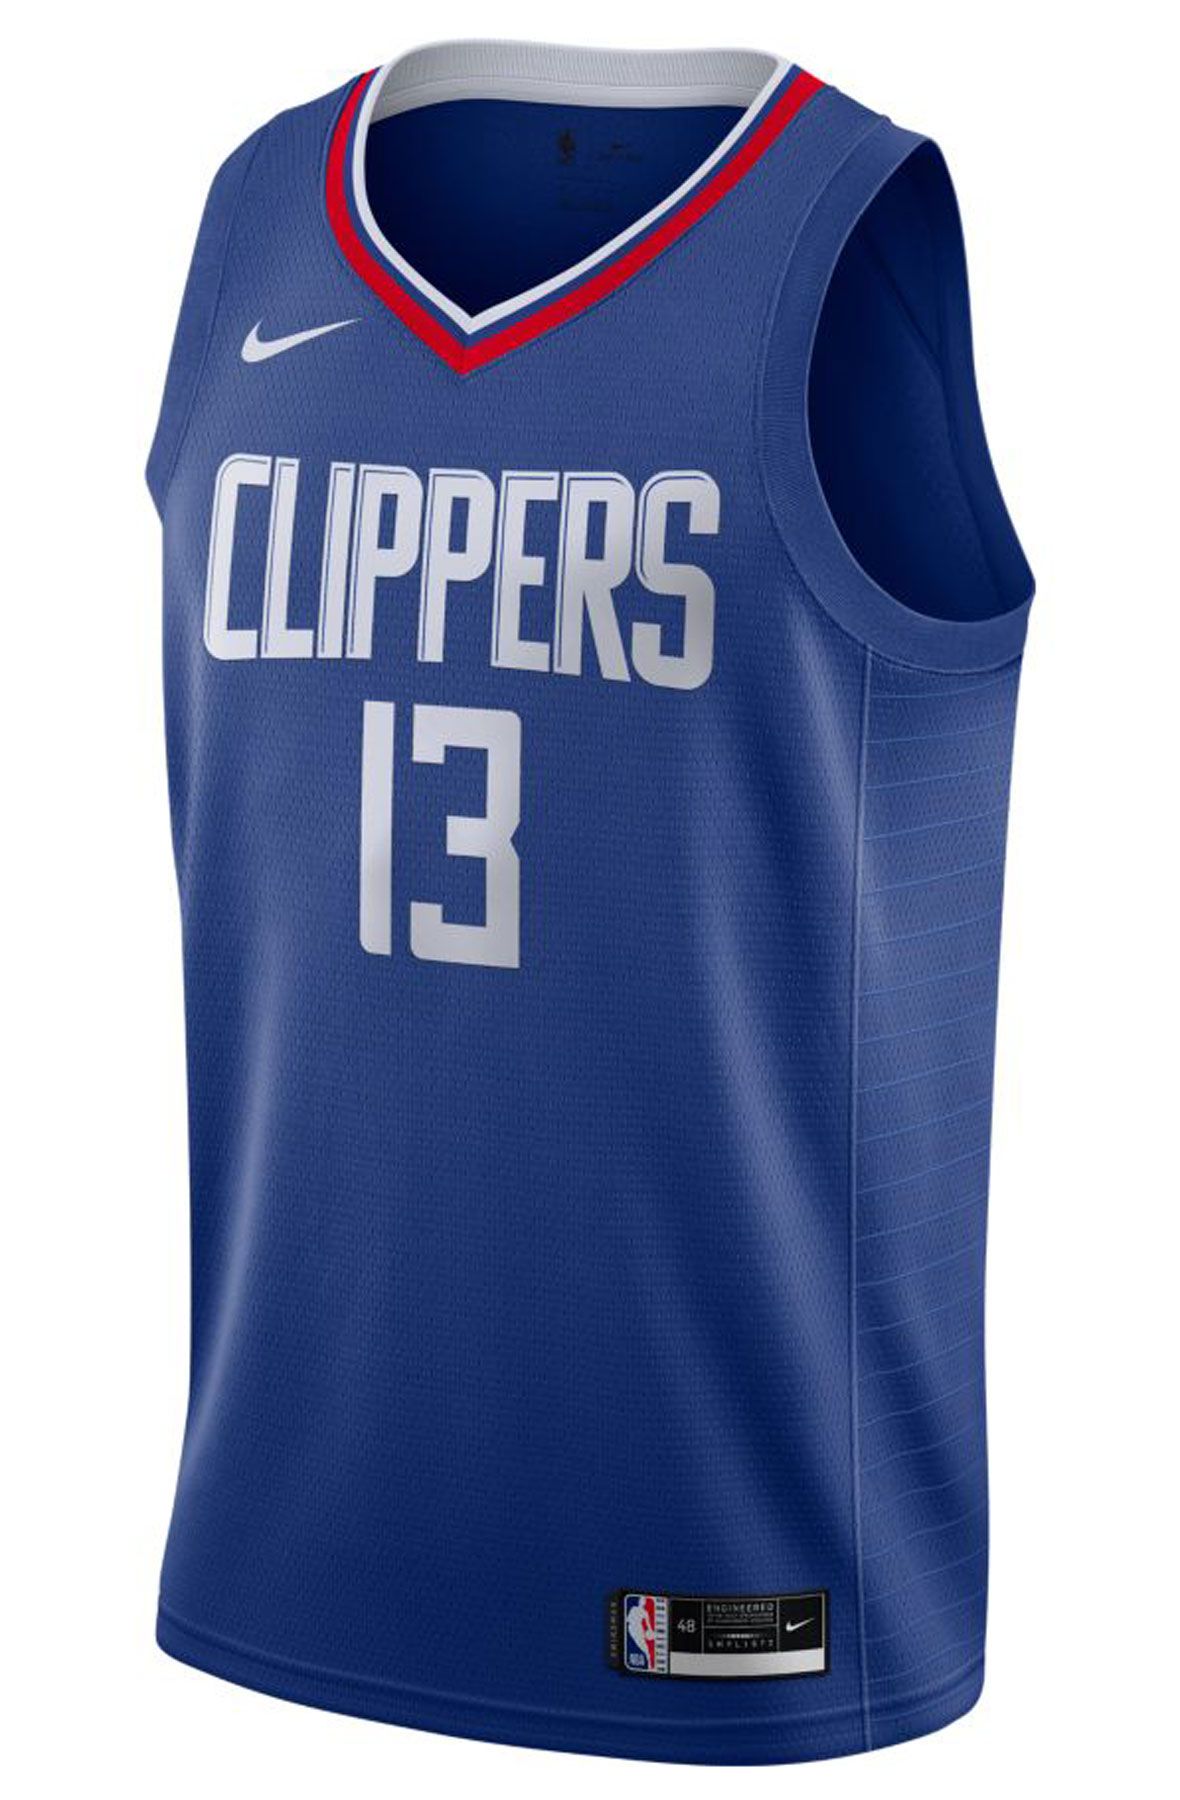 Los Angeles Clippers City Edition Jersey  Jersey, Los angeles clippers,  Paul george